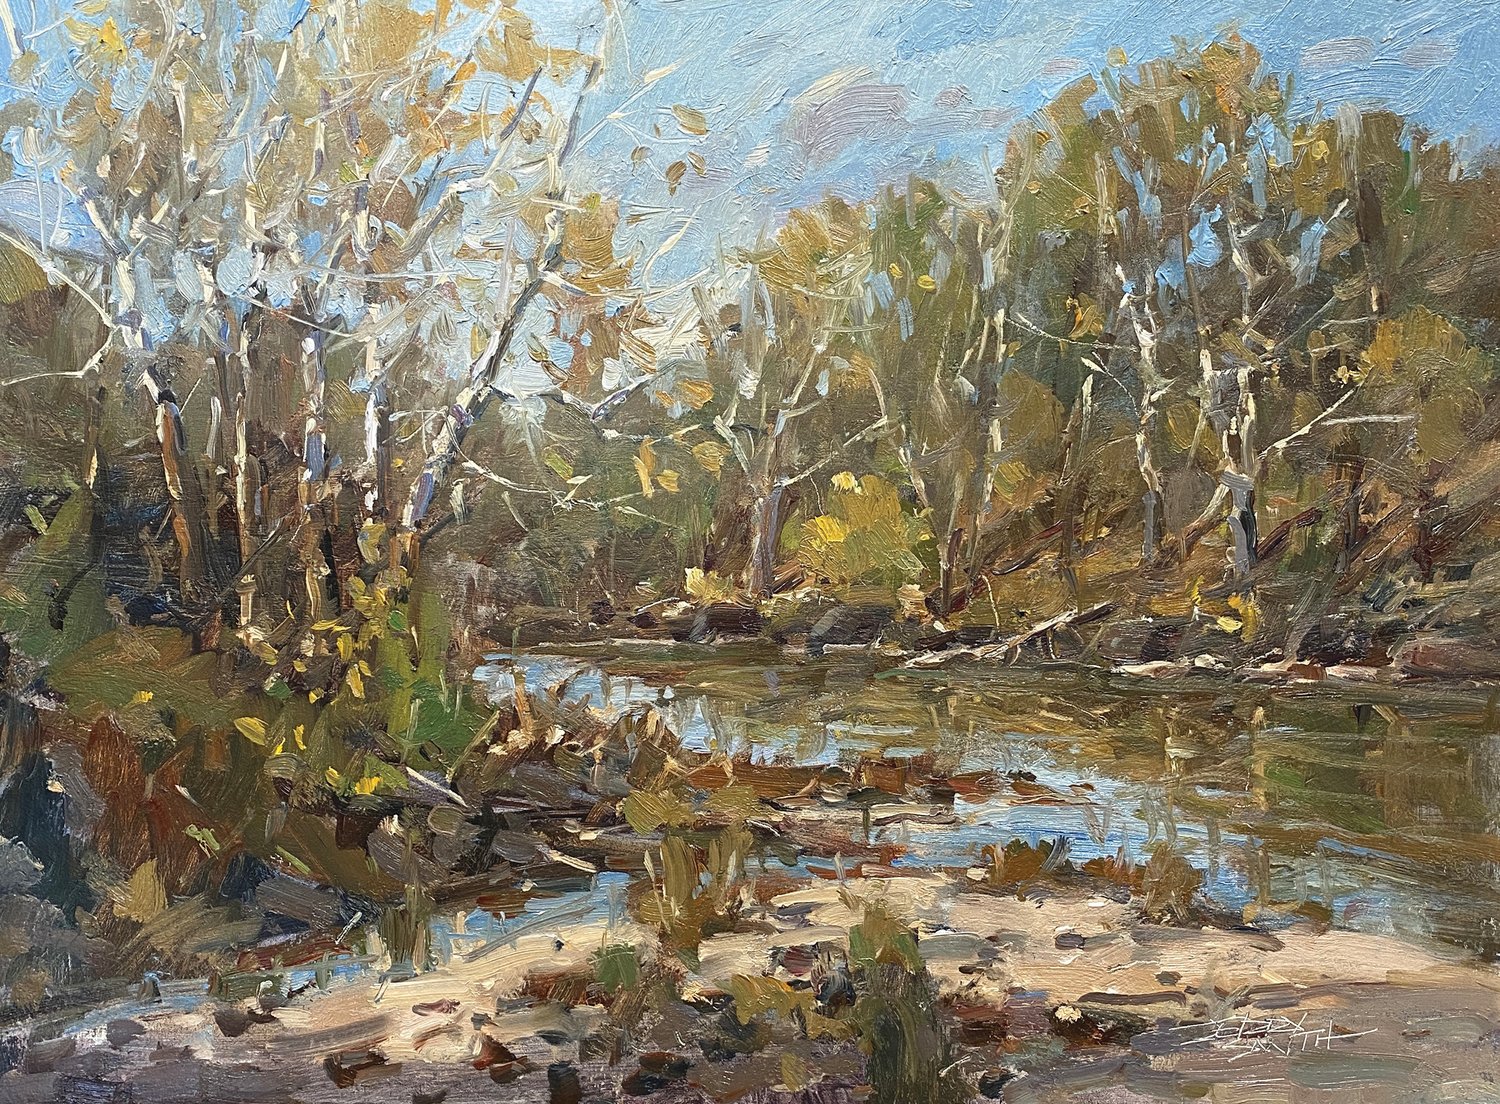 Jerry Smith uses oil to paint a portrait of Sugar Creek bordering Shades State Park.